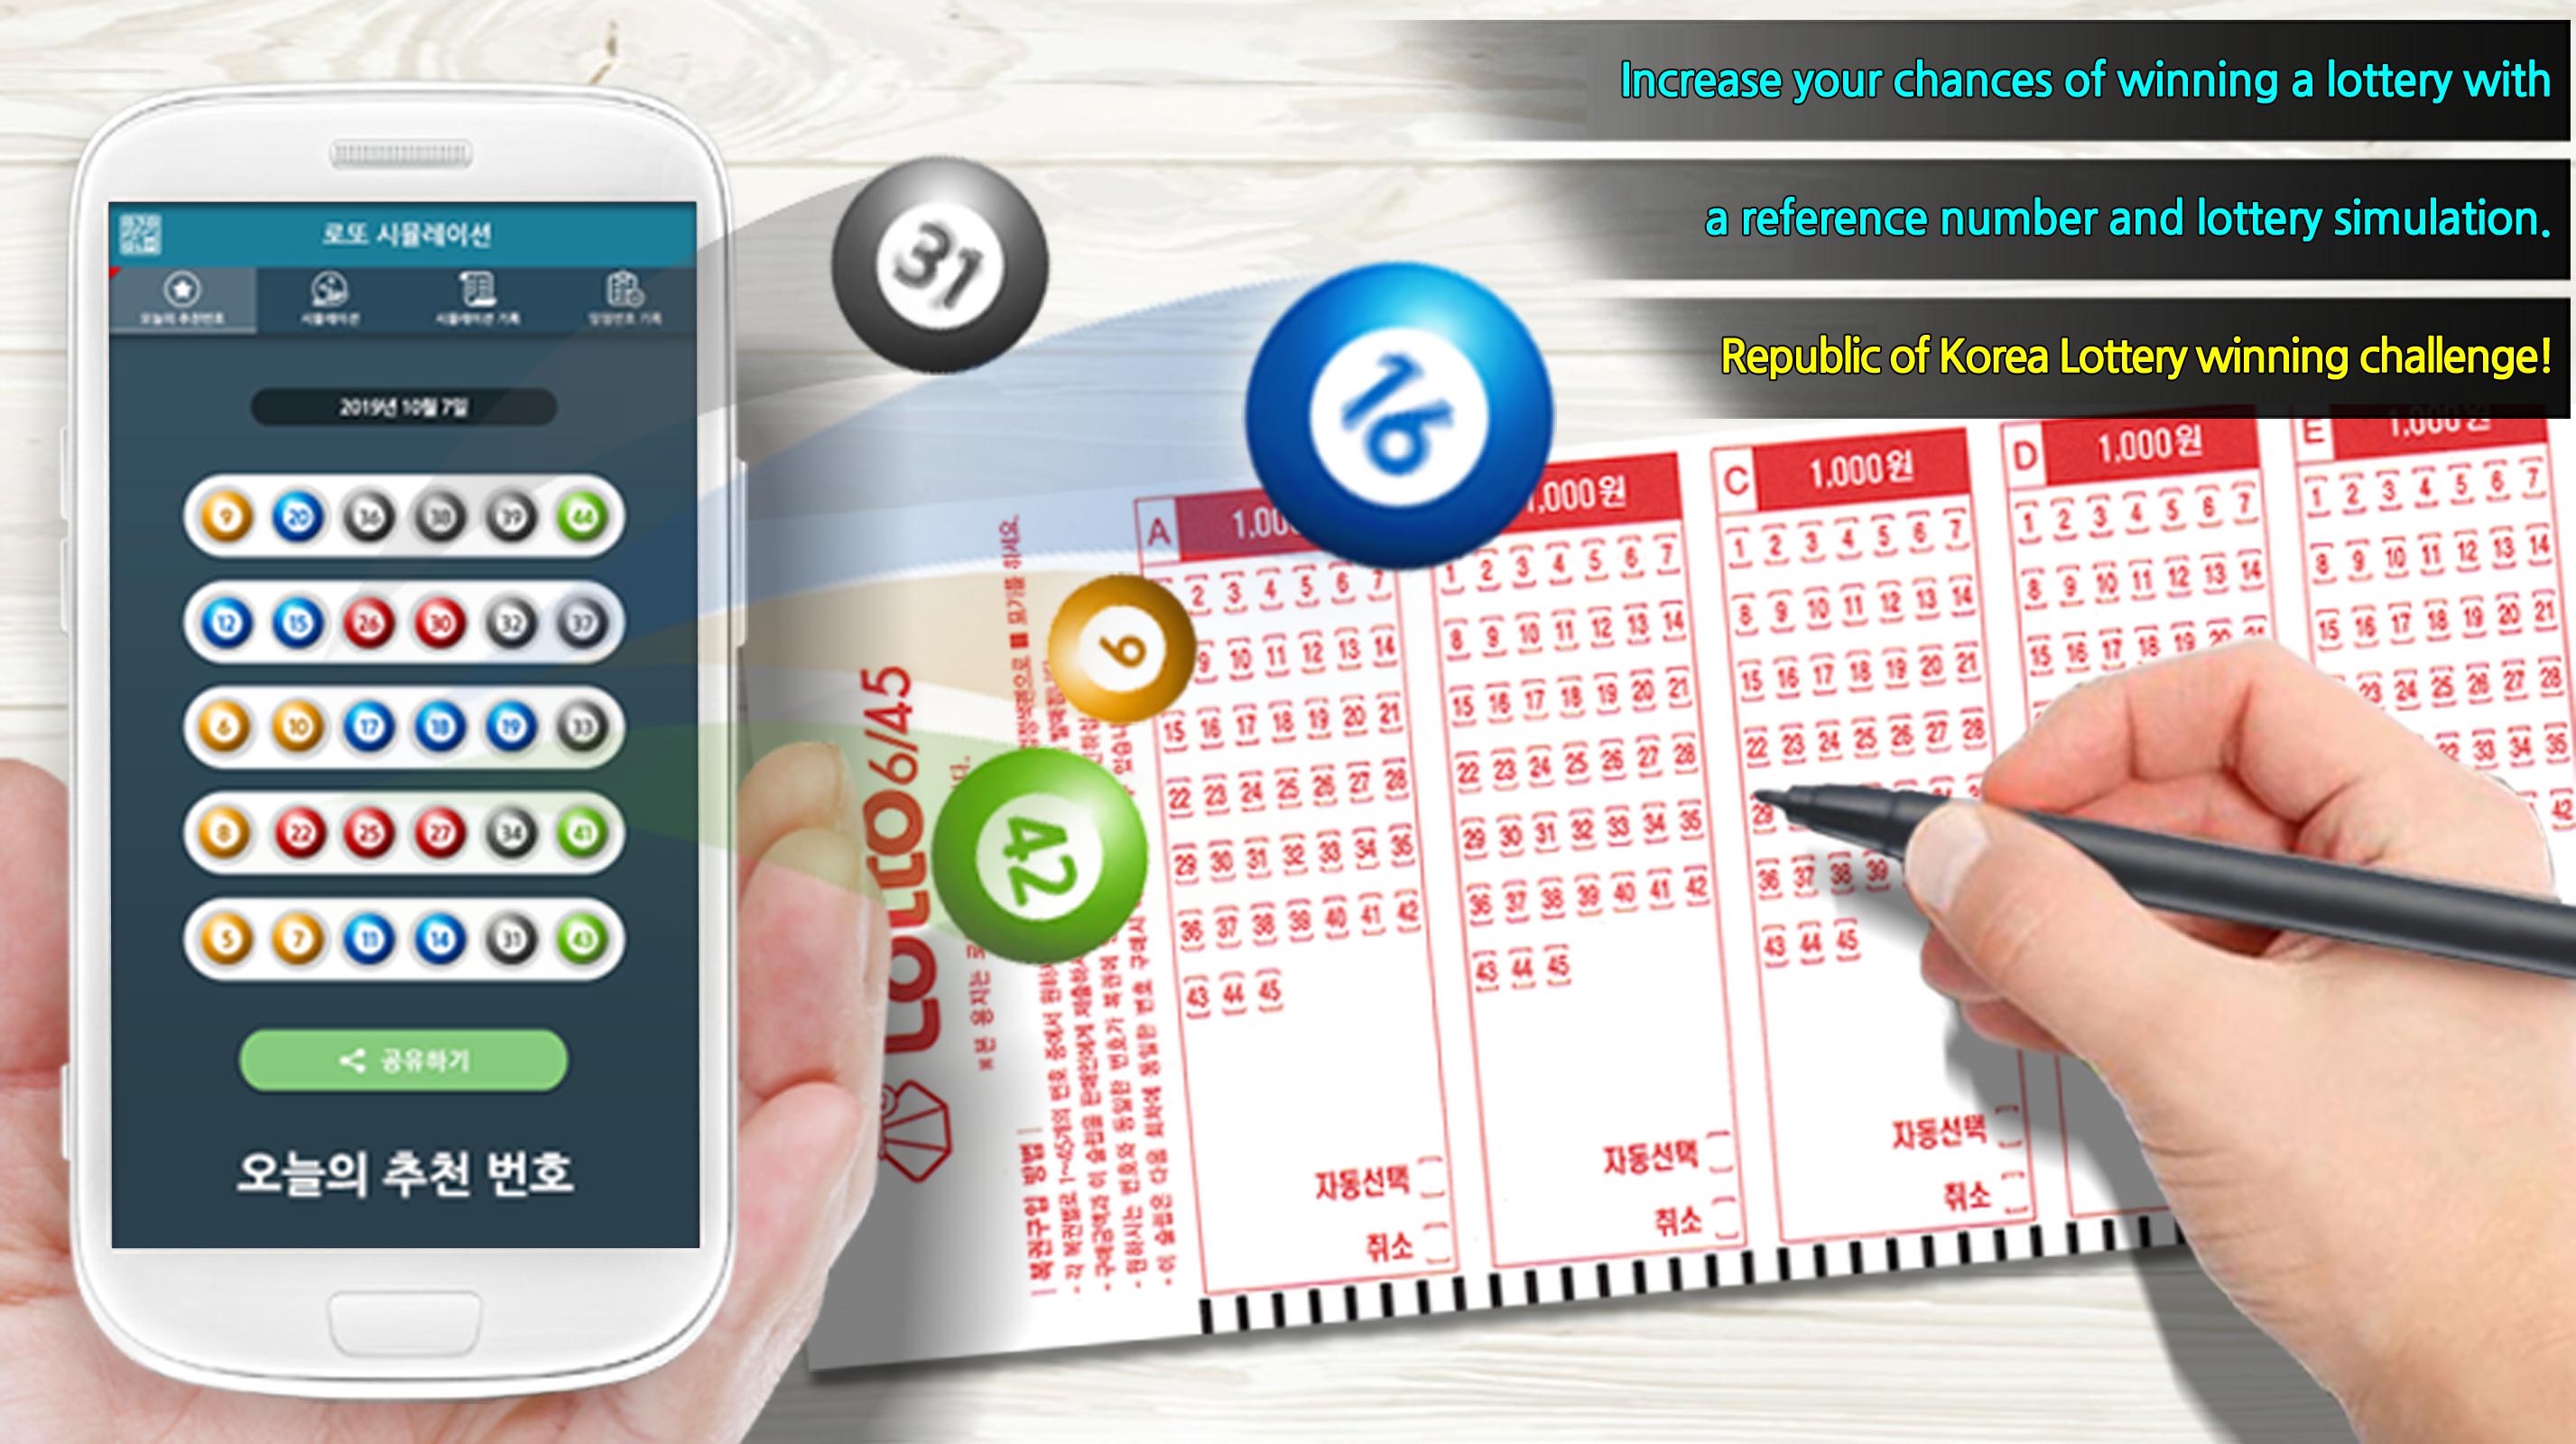 Korea Lotto Simulation Lottery Number Generator For Android Apk Download - free robux loto 1 16 download android apk aptoide